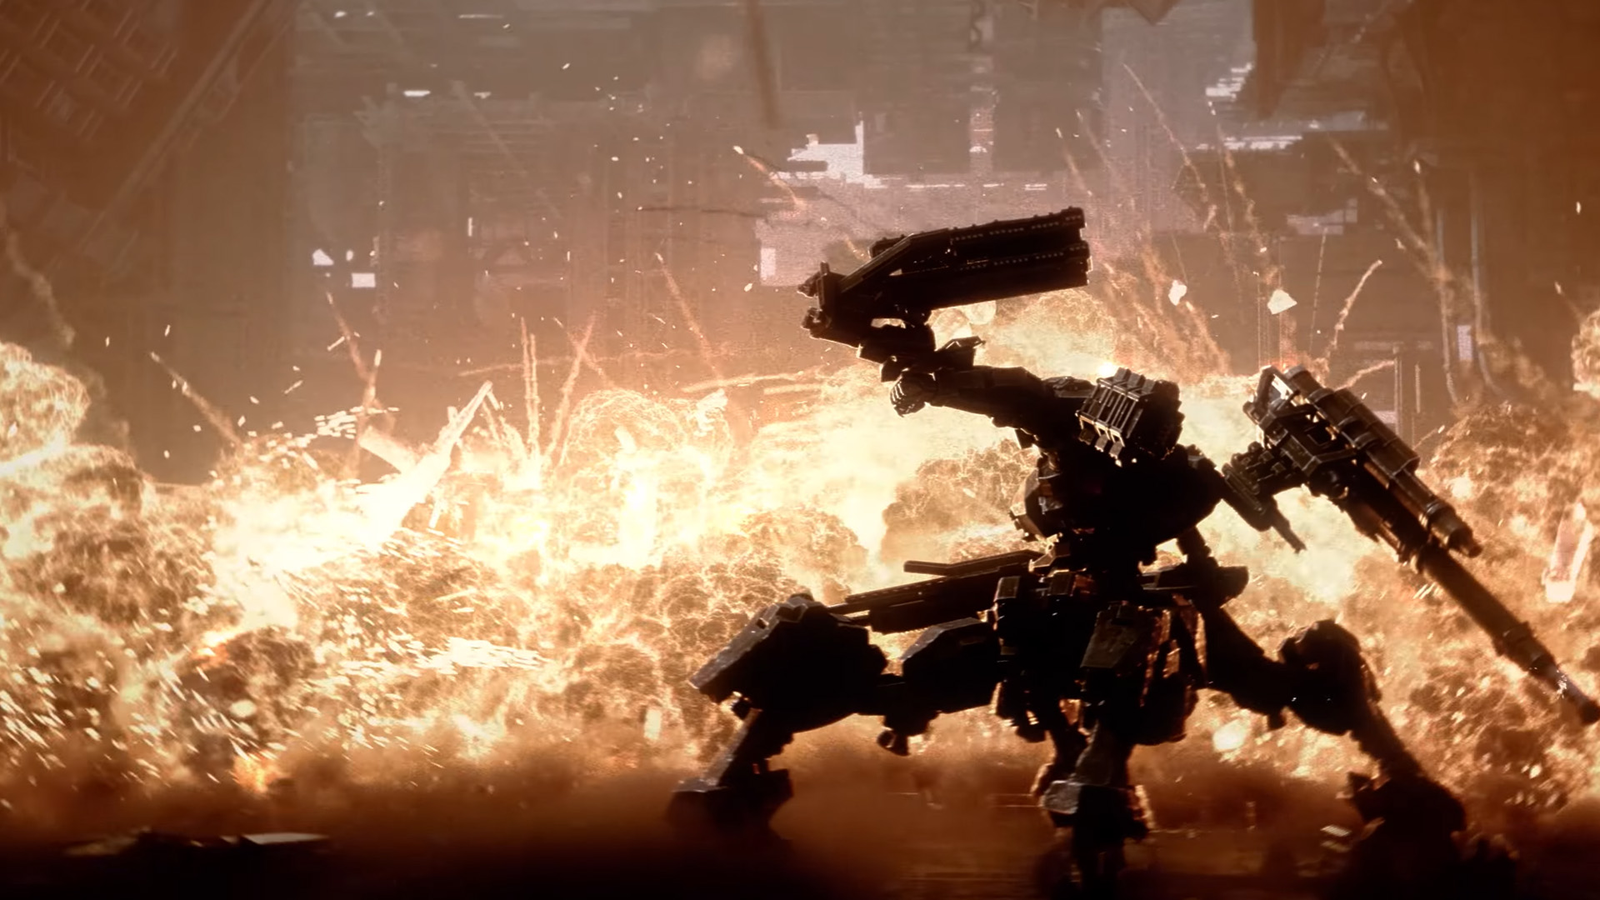 FromSoftware Aesthetics on X: Official Armored Core 2 wallpaper